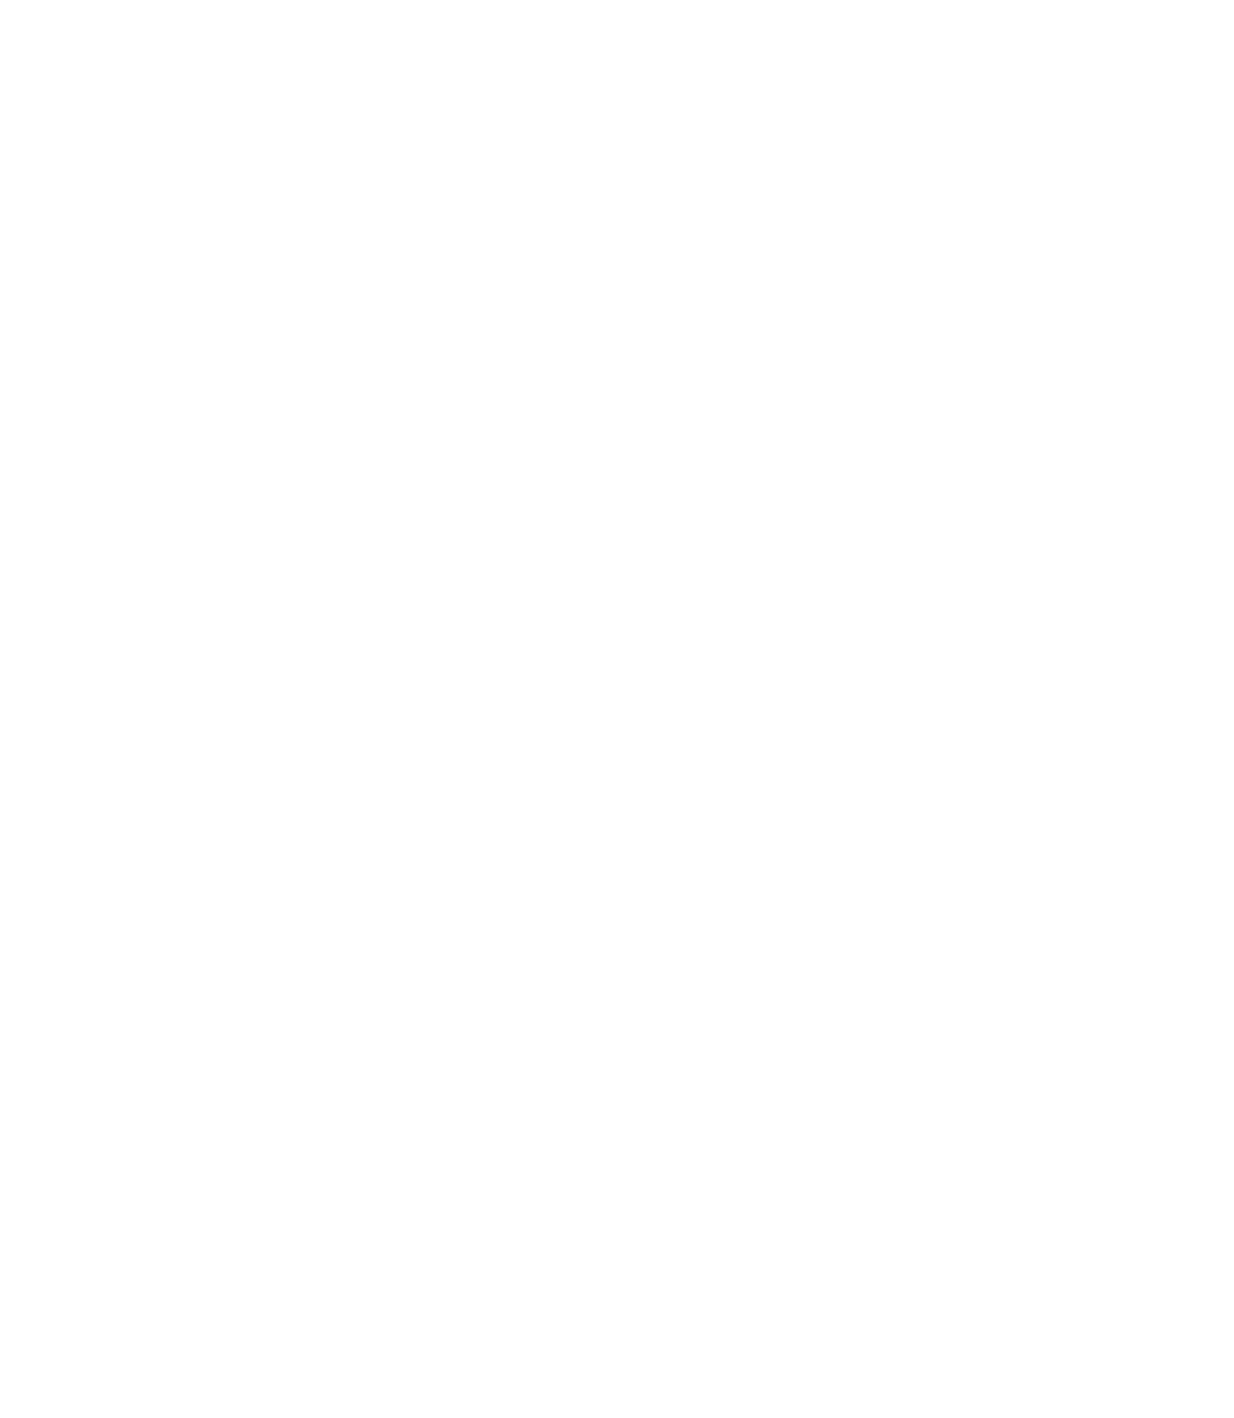 acowsay